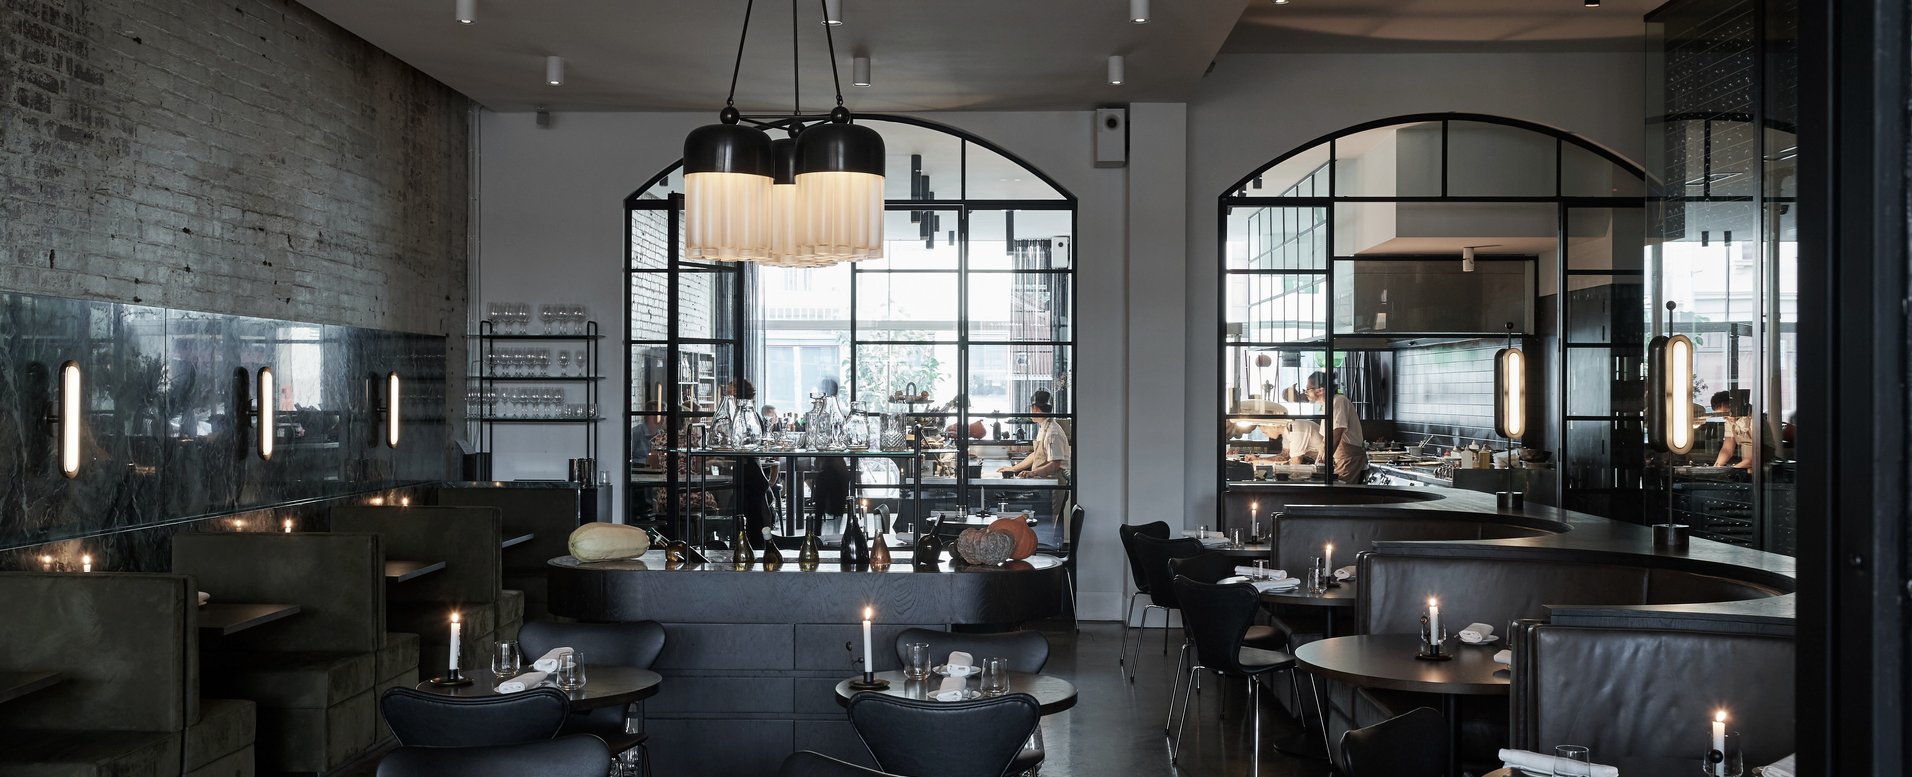 Cutler & Co by IF Architecture | ArchiPro AU